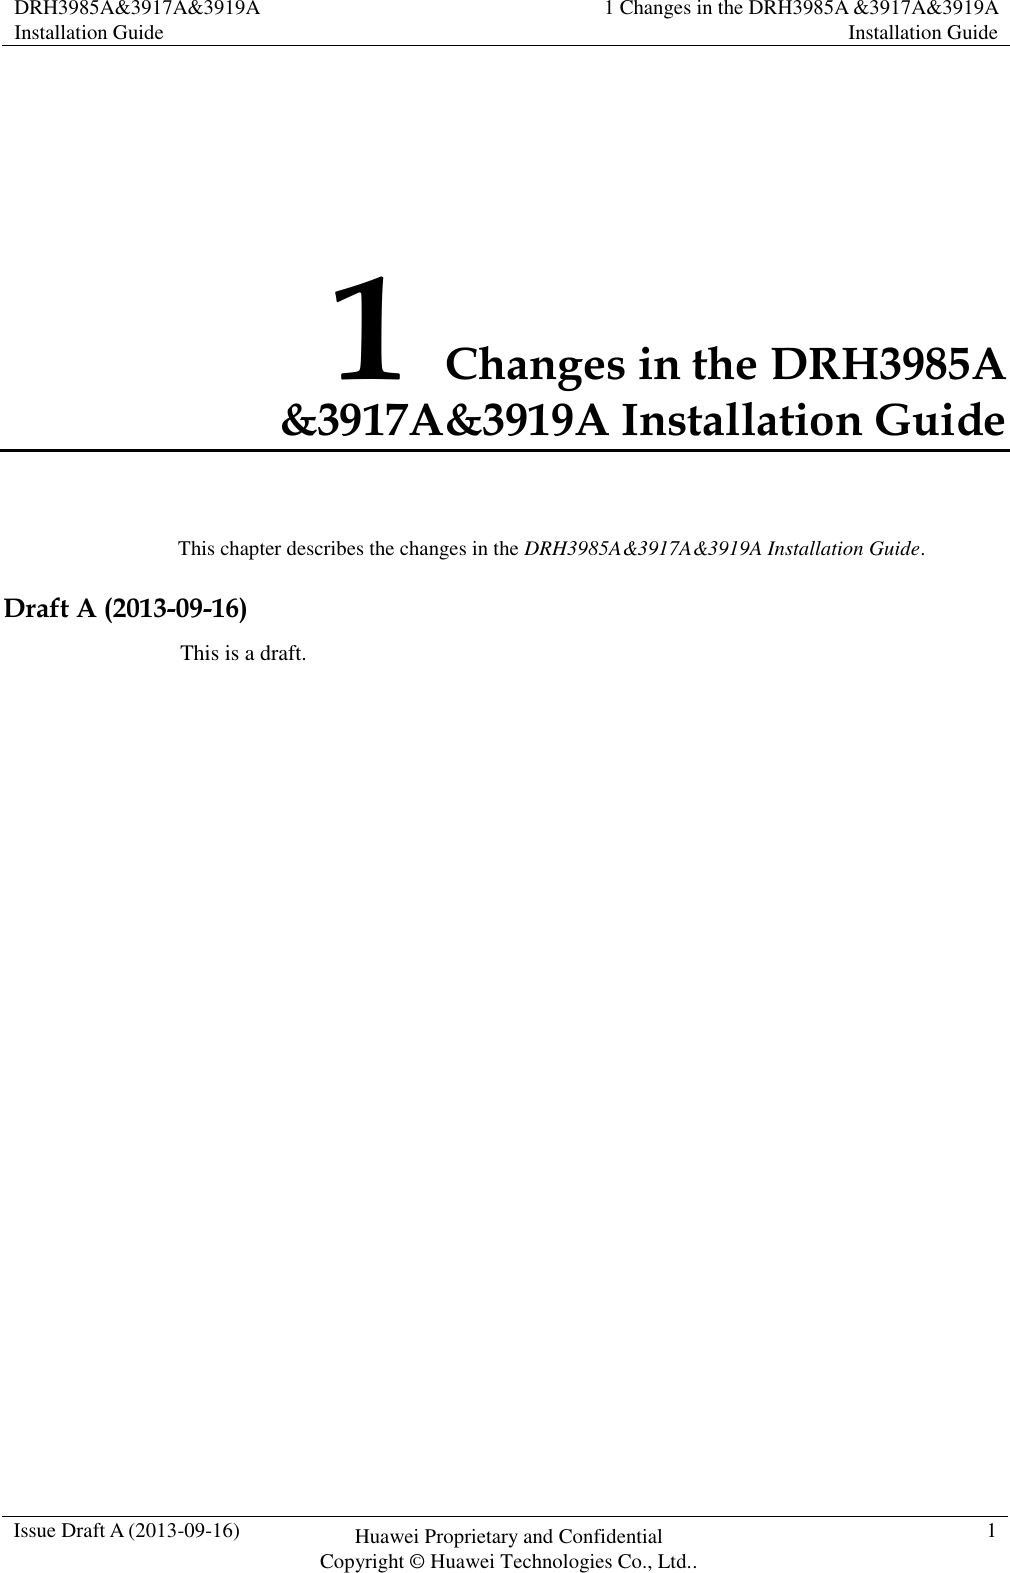 DRH3985A&amp;3917A&amp;3919A Installation Guide 1 Changes in the DRH3985A &amp;3917A&amp;3919A Installation Guide  Issue Draft A (2013-09-16) Huawei Proprietary and Confidential                                     Copyright © Huawei Technologies Co., Ltd.. 1  1 Changes in the DRH3985A &amp;3917A&amp;3919A Installation Guide This chapter describes the changes in the DRH3985A&amp;3917A&amp;3919A Installation Guide. Draft A (2013-09-16) This is a draft. 